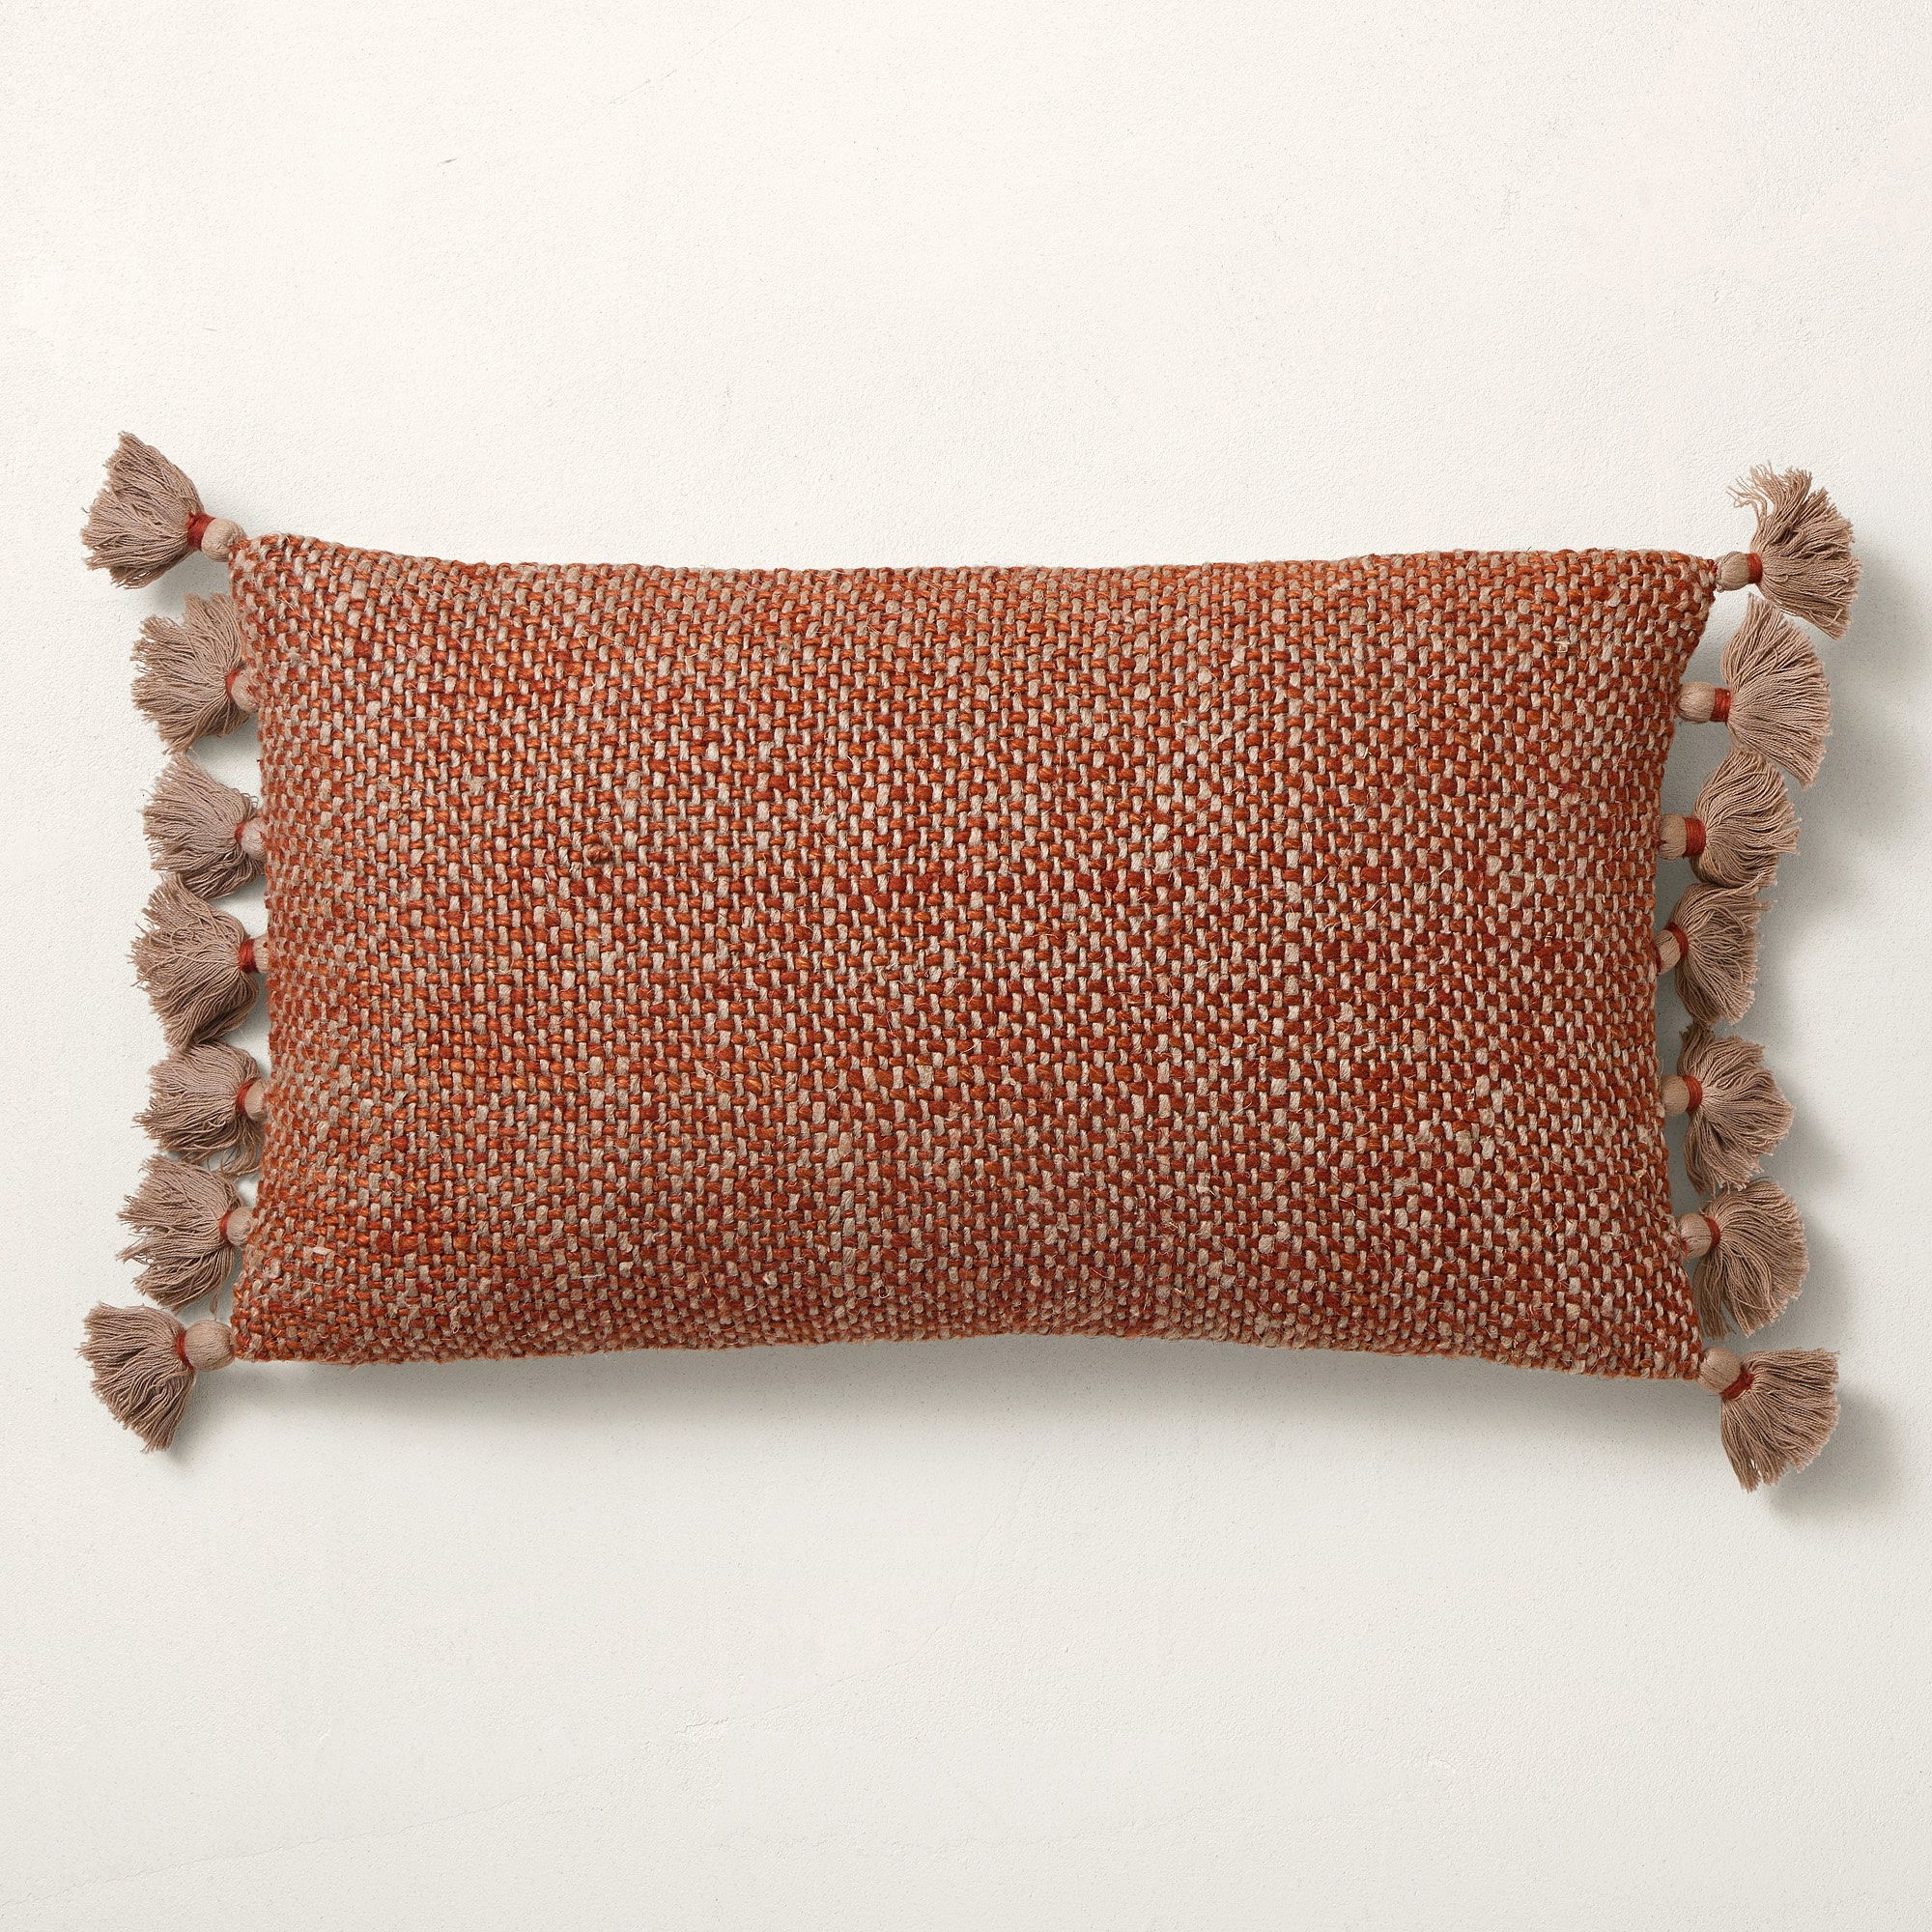 Two Tone Chunky Linen Tassels Pillow Cover, 12"x21", Copper - Image 4